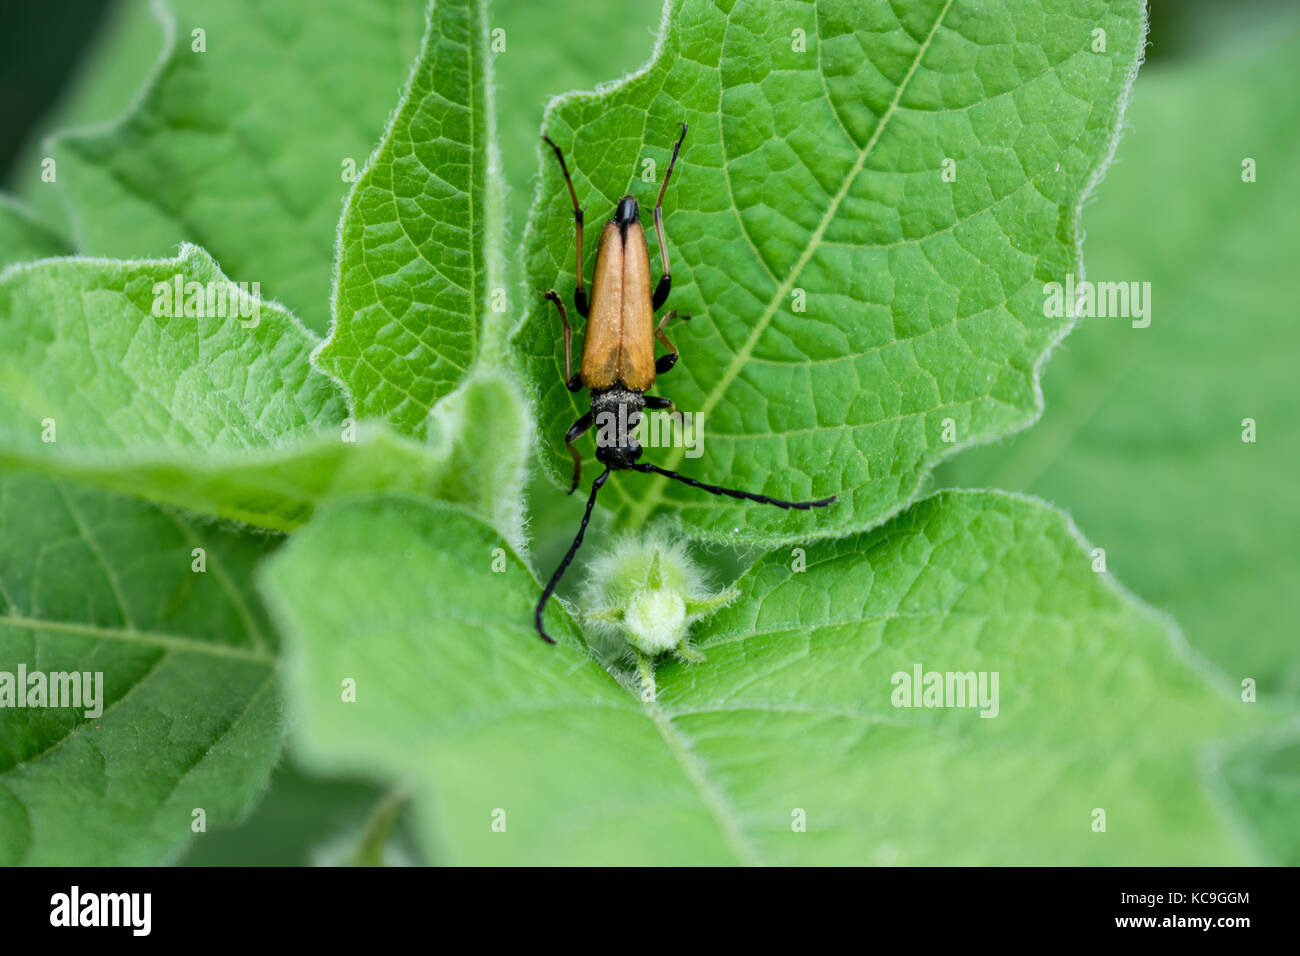 Close-Up Of Yellow And Black Longhorn Beetle Or Rutpela Maculata Eating Pollen On Leaf Stock Photo